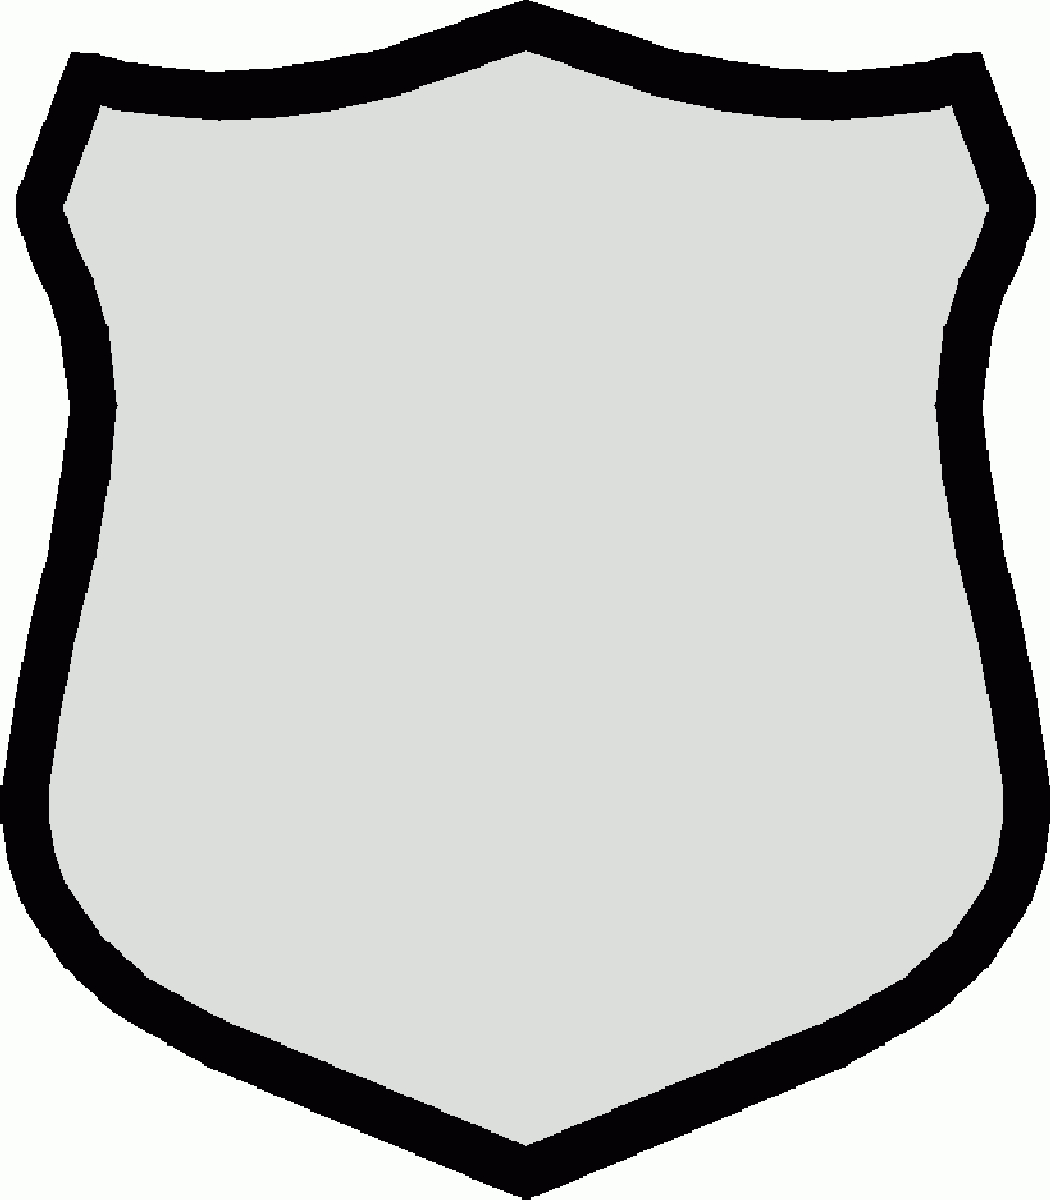 Shield Template Clipart | Free Download Best Shield Template With Regard To Blank Shield Template Printable